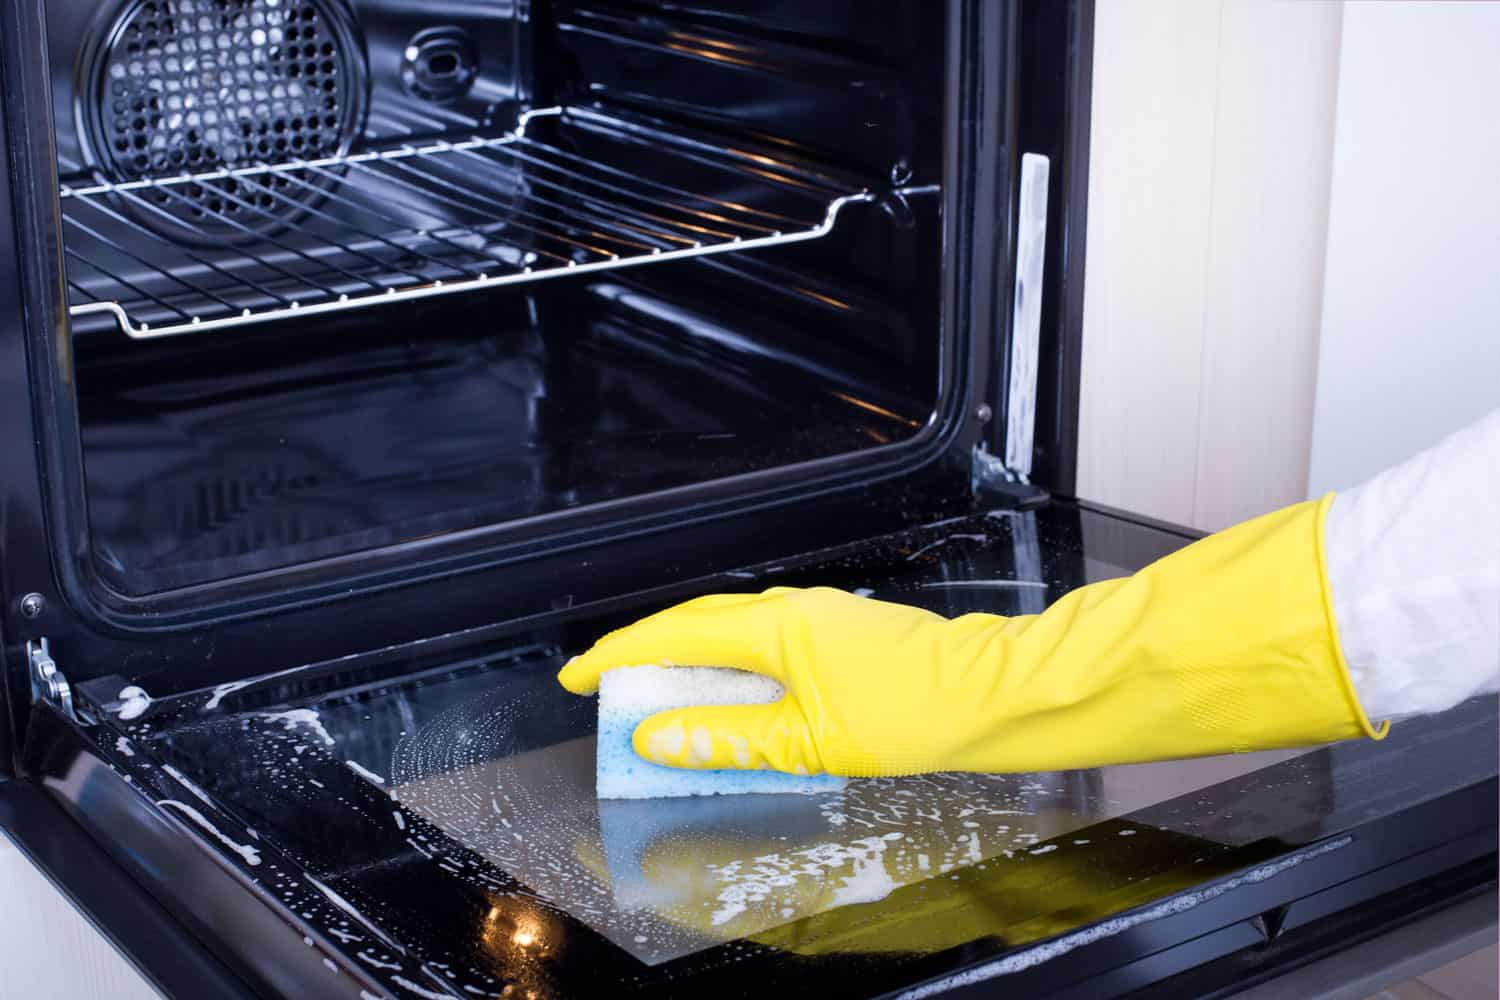 A woman wearing gloves and using a sponge to clean the glass door of an oven